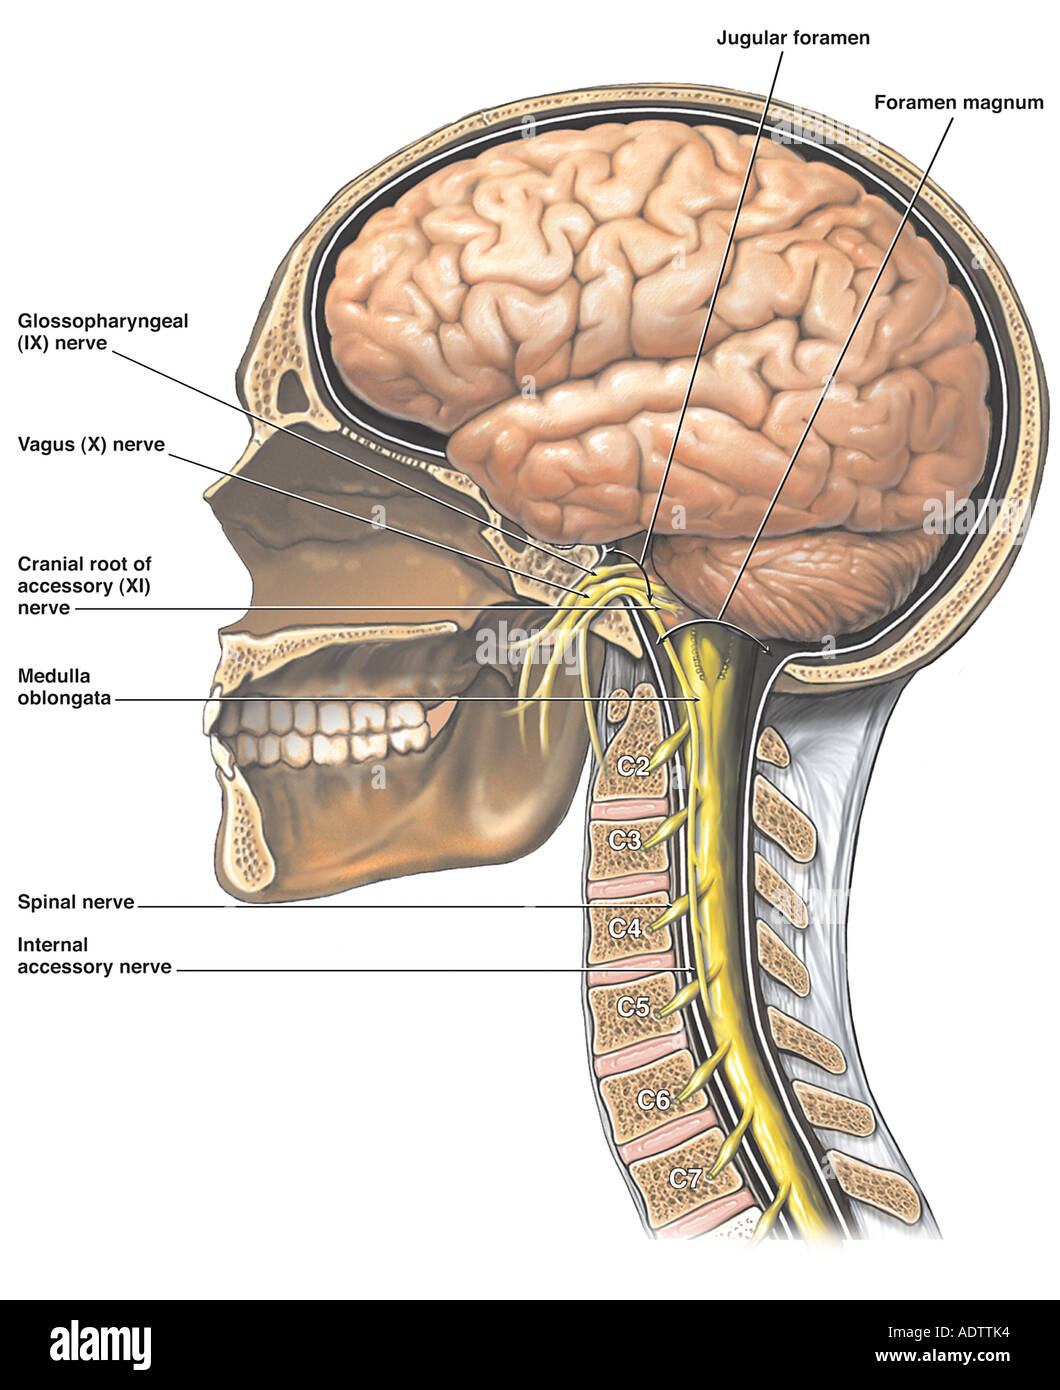 Anatomy Of The Brain And Cranial Nerves Stock Photo 7710259 Alamy